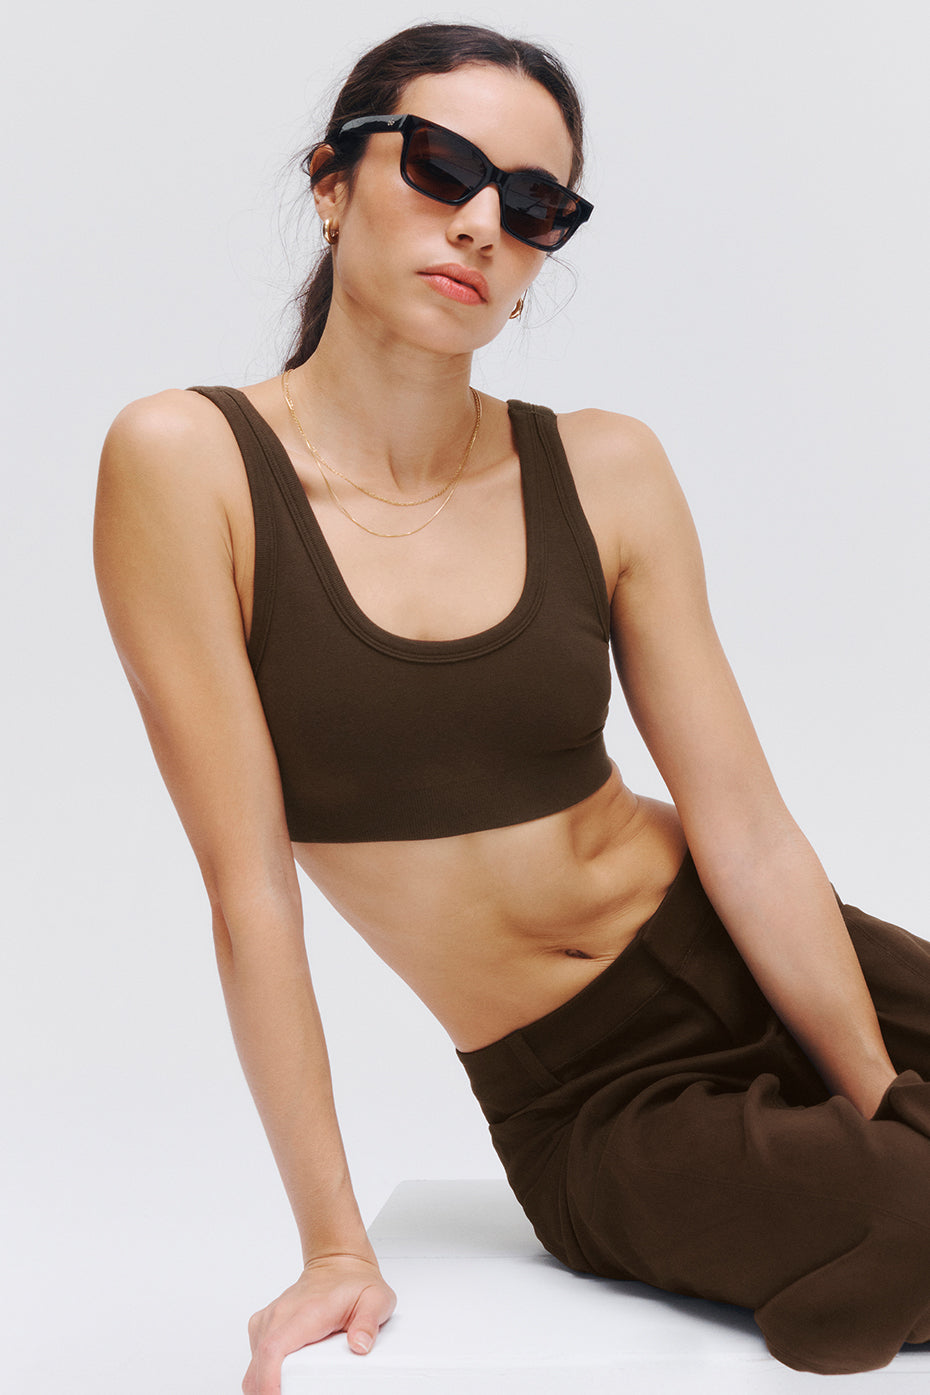 Alo Yoga Airlift Intrigue Bra In Espresso Tan Size M - $49 - From Lizanne